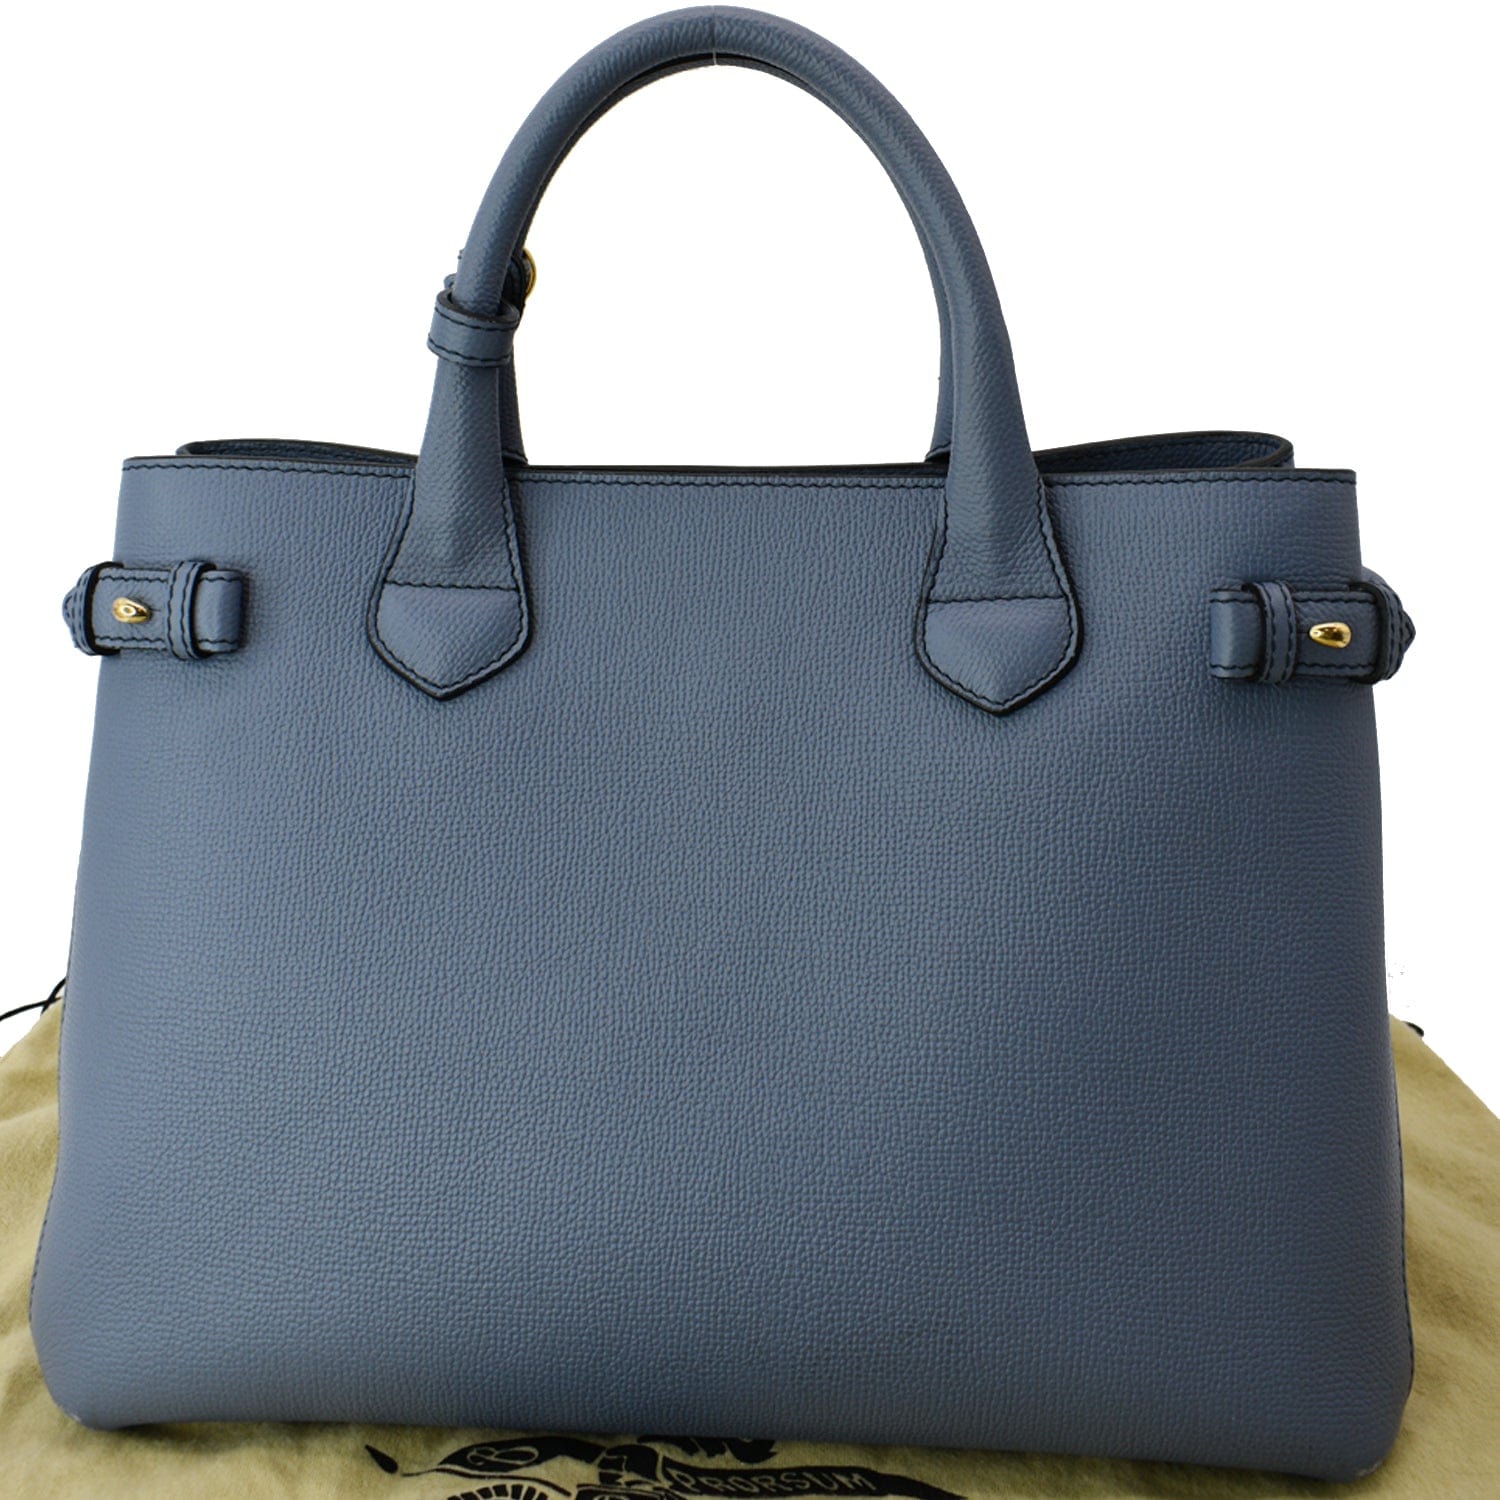 Burberry Blue Leather Medium Banner Tote Bag Auction